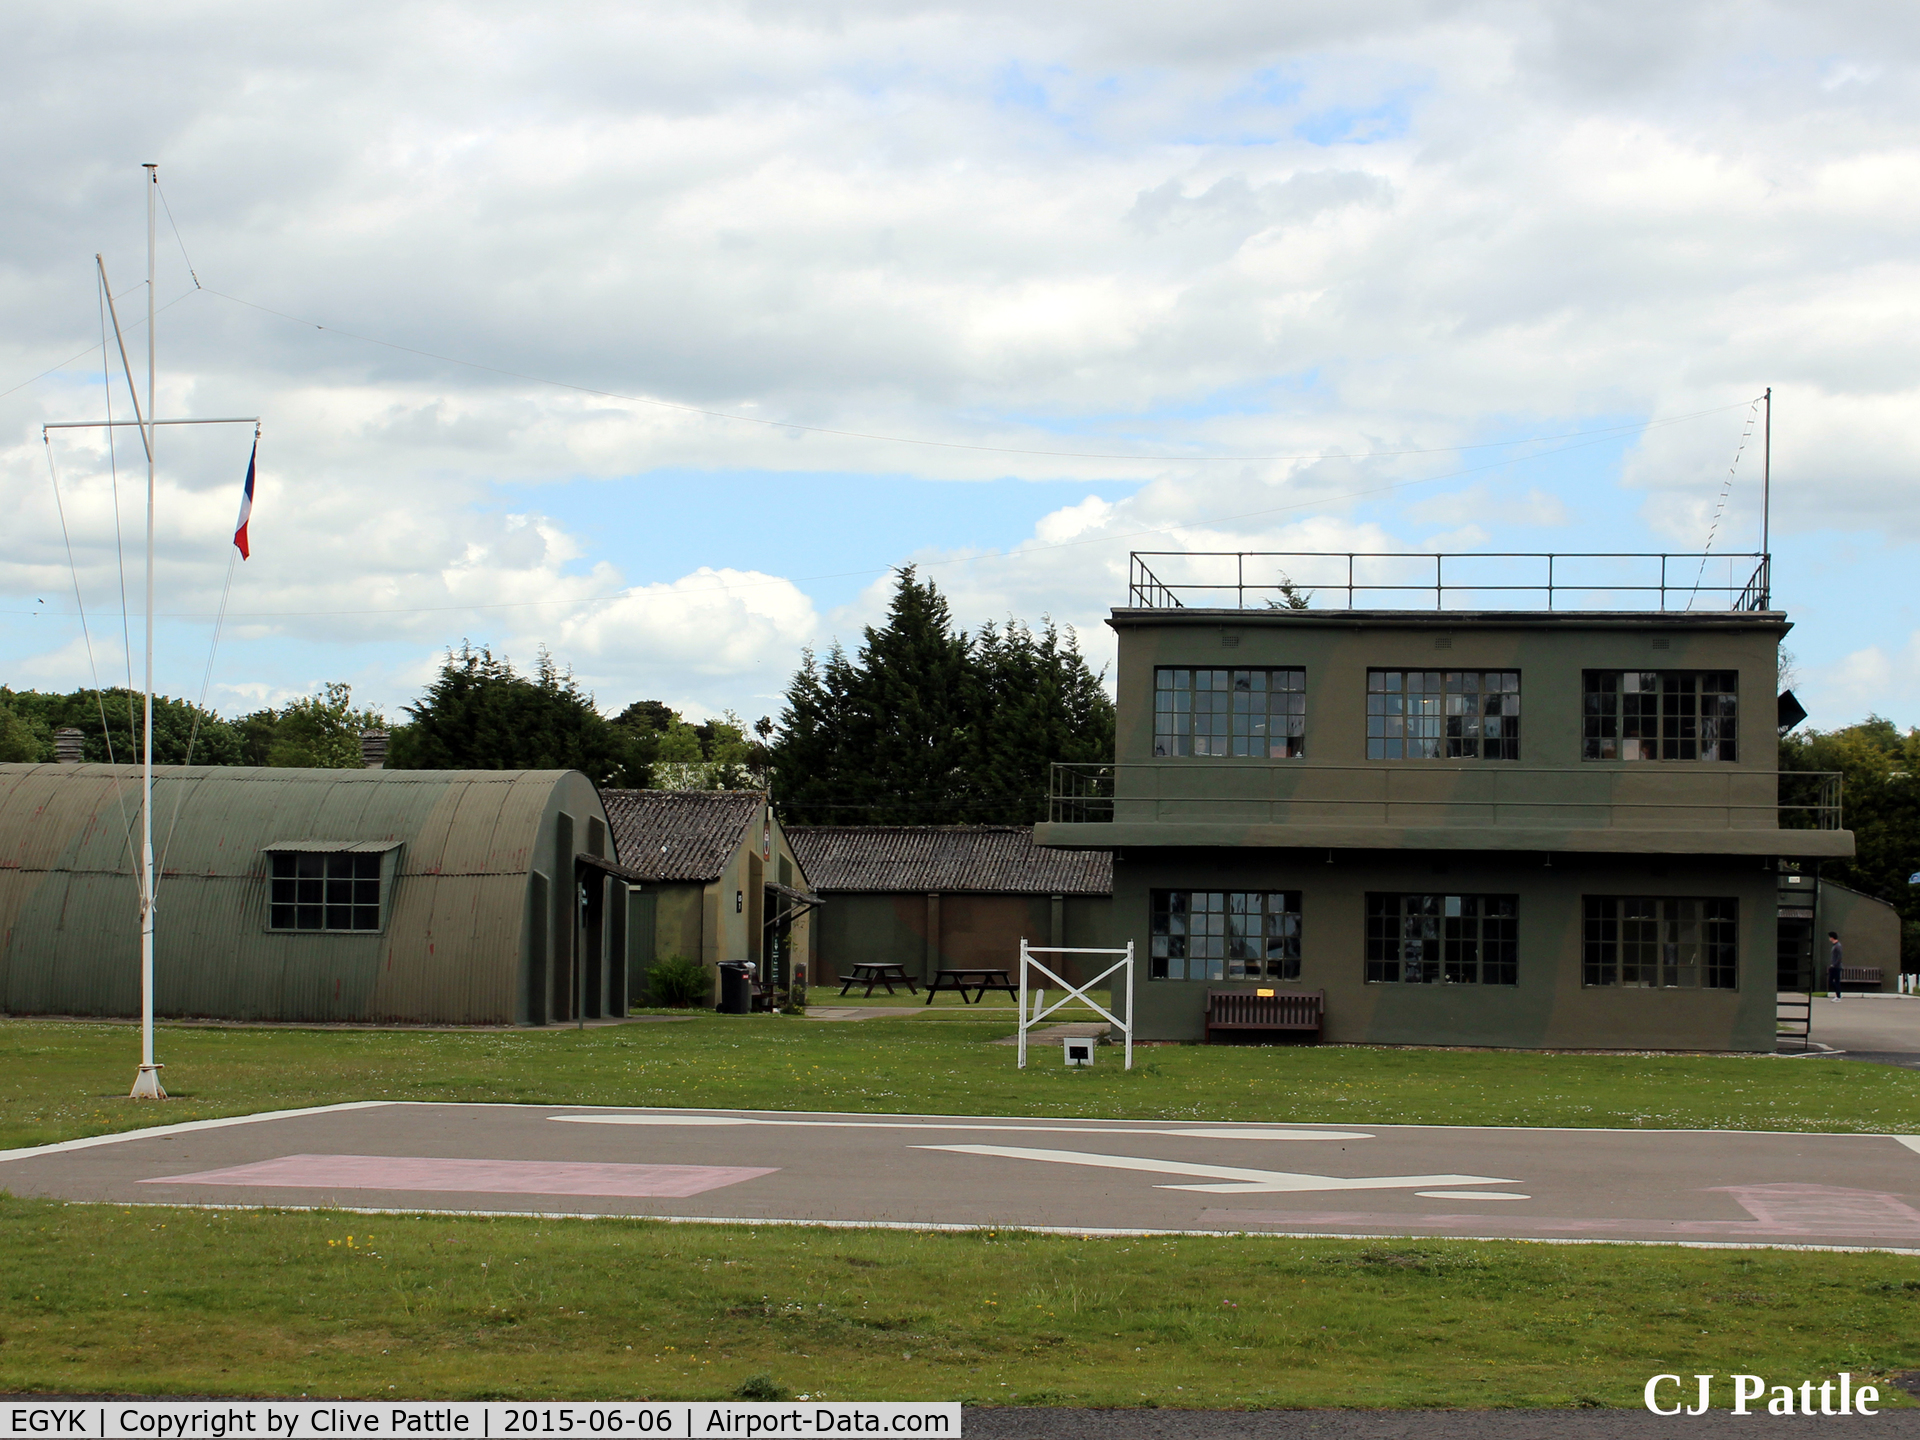 EGYK Airport - A view of the watchtower and nissen hut buildings at the Yorkshire Aviation Museum, Elvington. The Tricolor flies at the mast head as a memorial to the members of the French Sqns based at the airfield in WWII